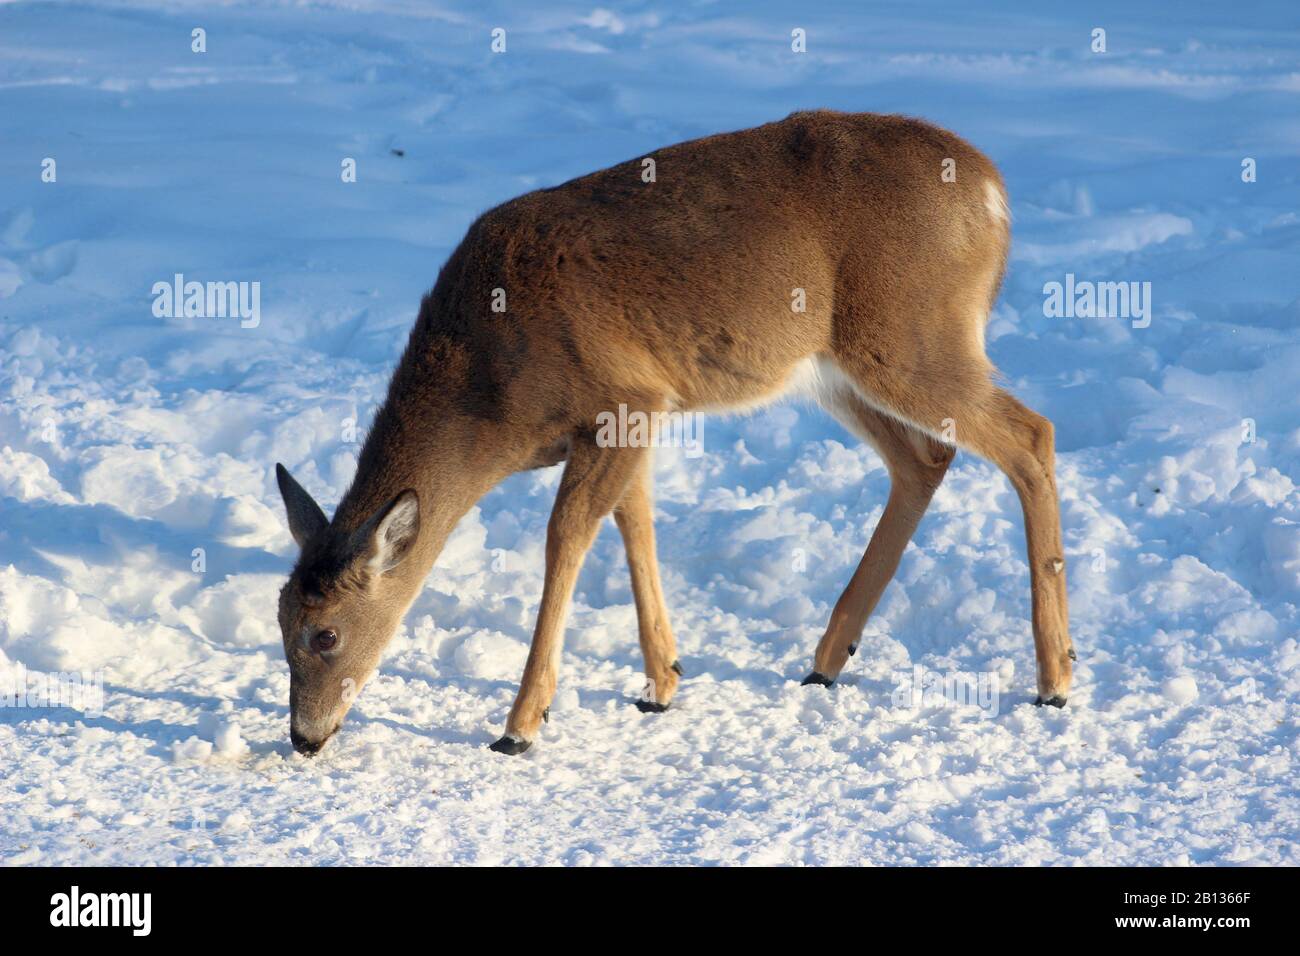 A Deer Nibbling On Corn In The Snow Stock Photo